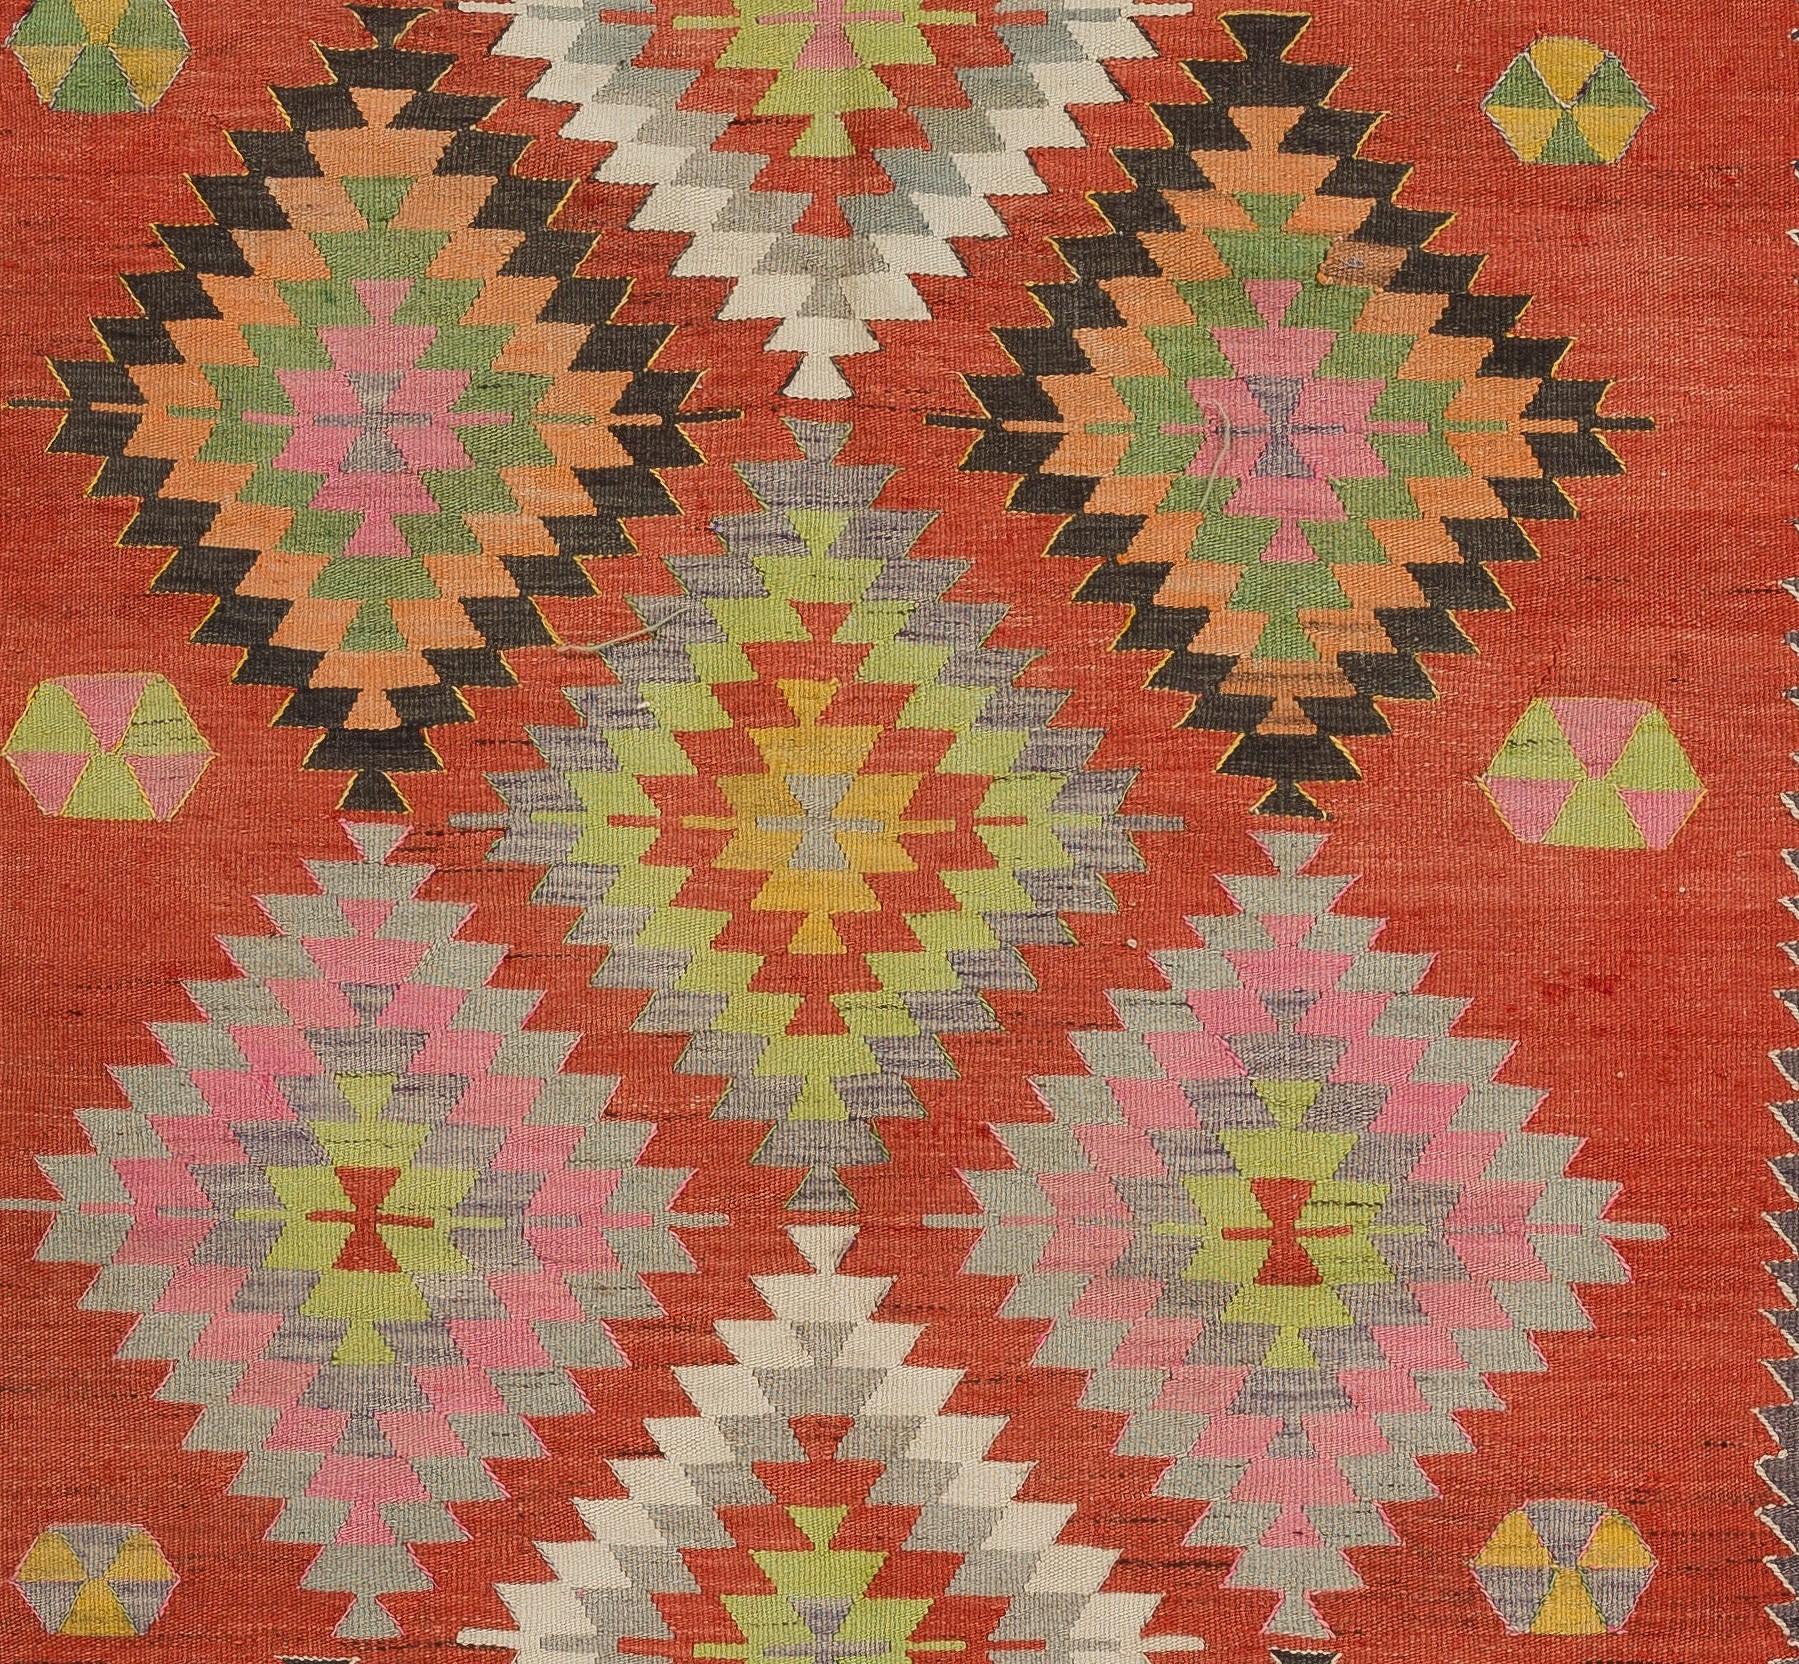 A colorful vintage Turkish Kilim. A flat-weave rug made completely of wool in excellent condition. 

This captivating Kilim features stepped diamond patterns nestled within each other, free-floating all-over the field in varying sizes and a large